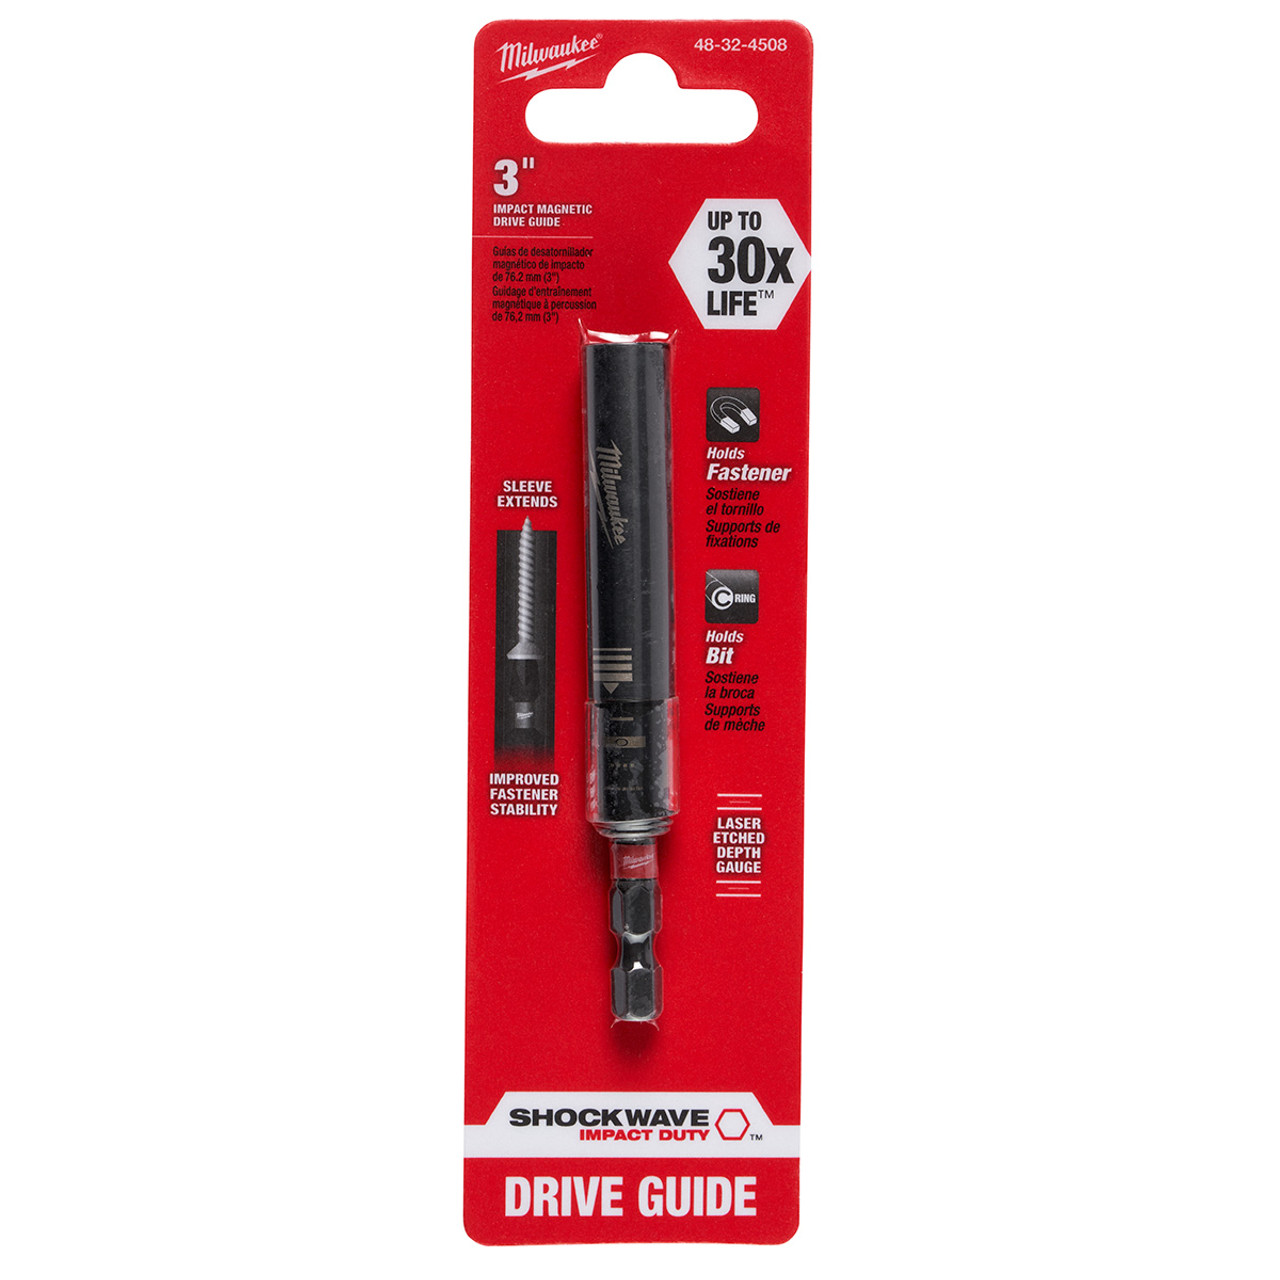 Milwaukee SHOCKWAVE 3 In. Magnetic Drive Guide Bit Holder